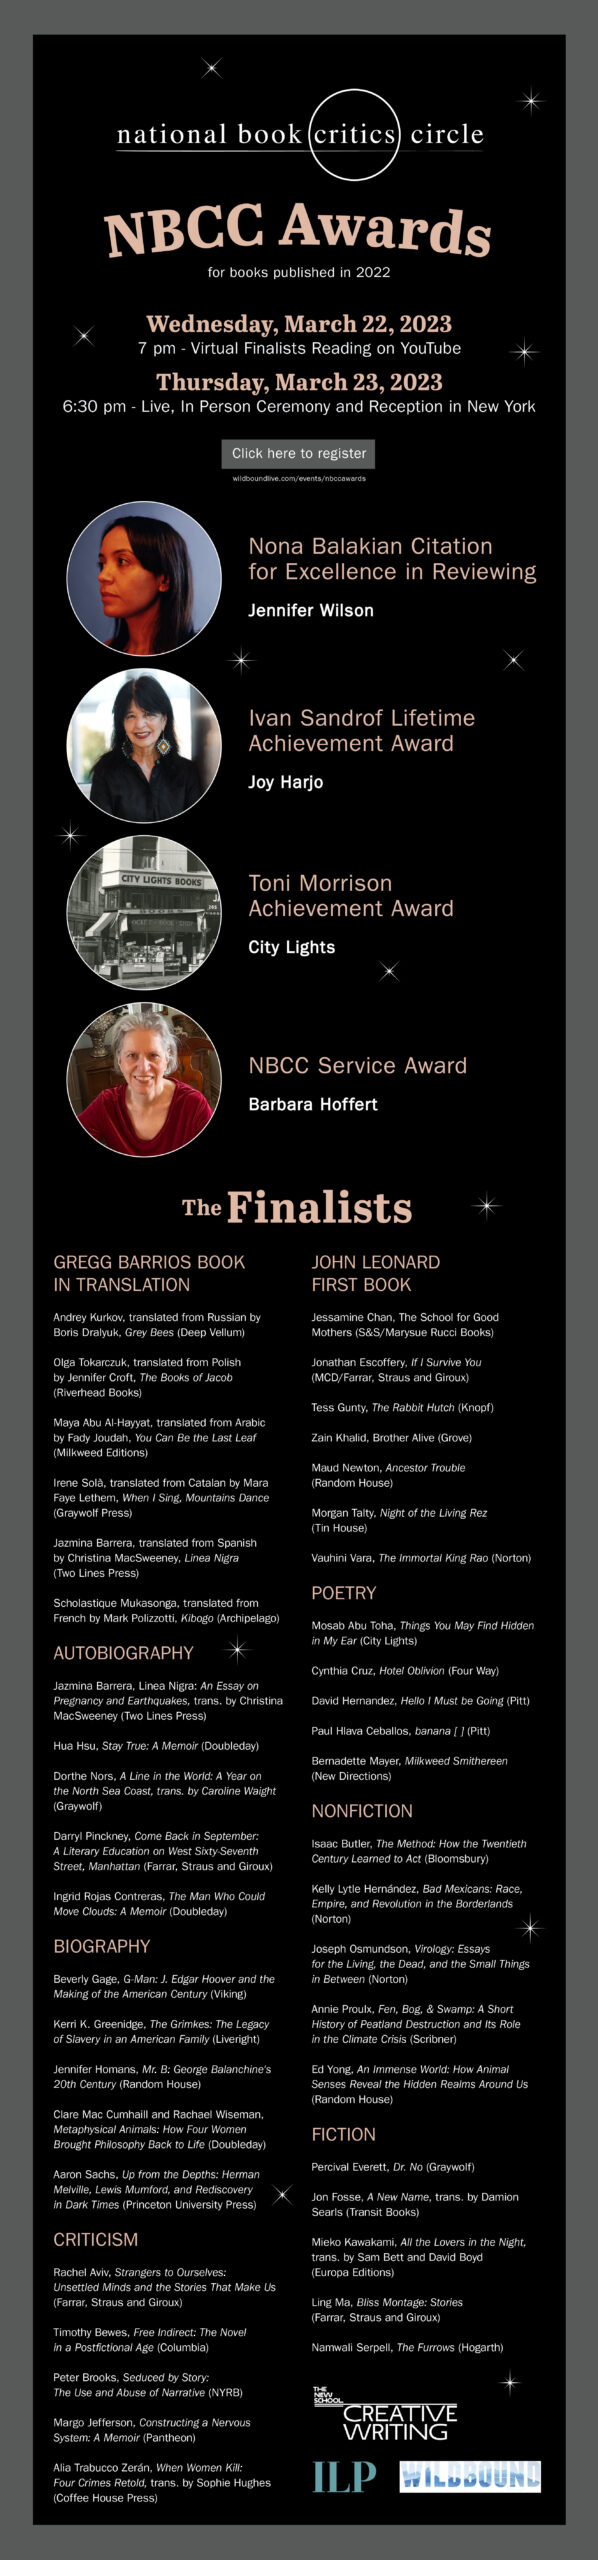 Invitation to the NBCC awards ceremony, reception, and readings